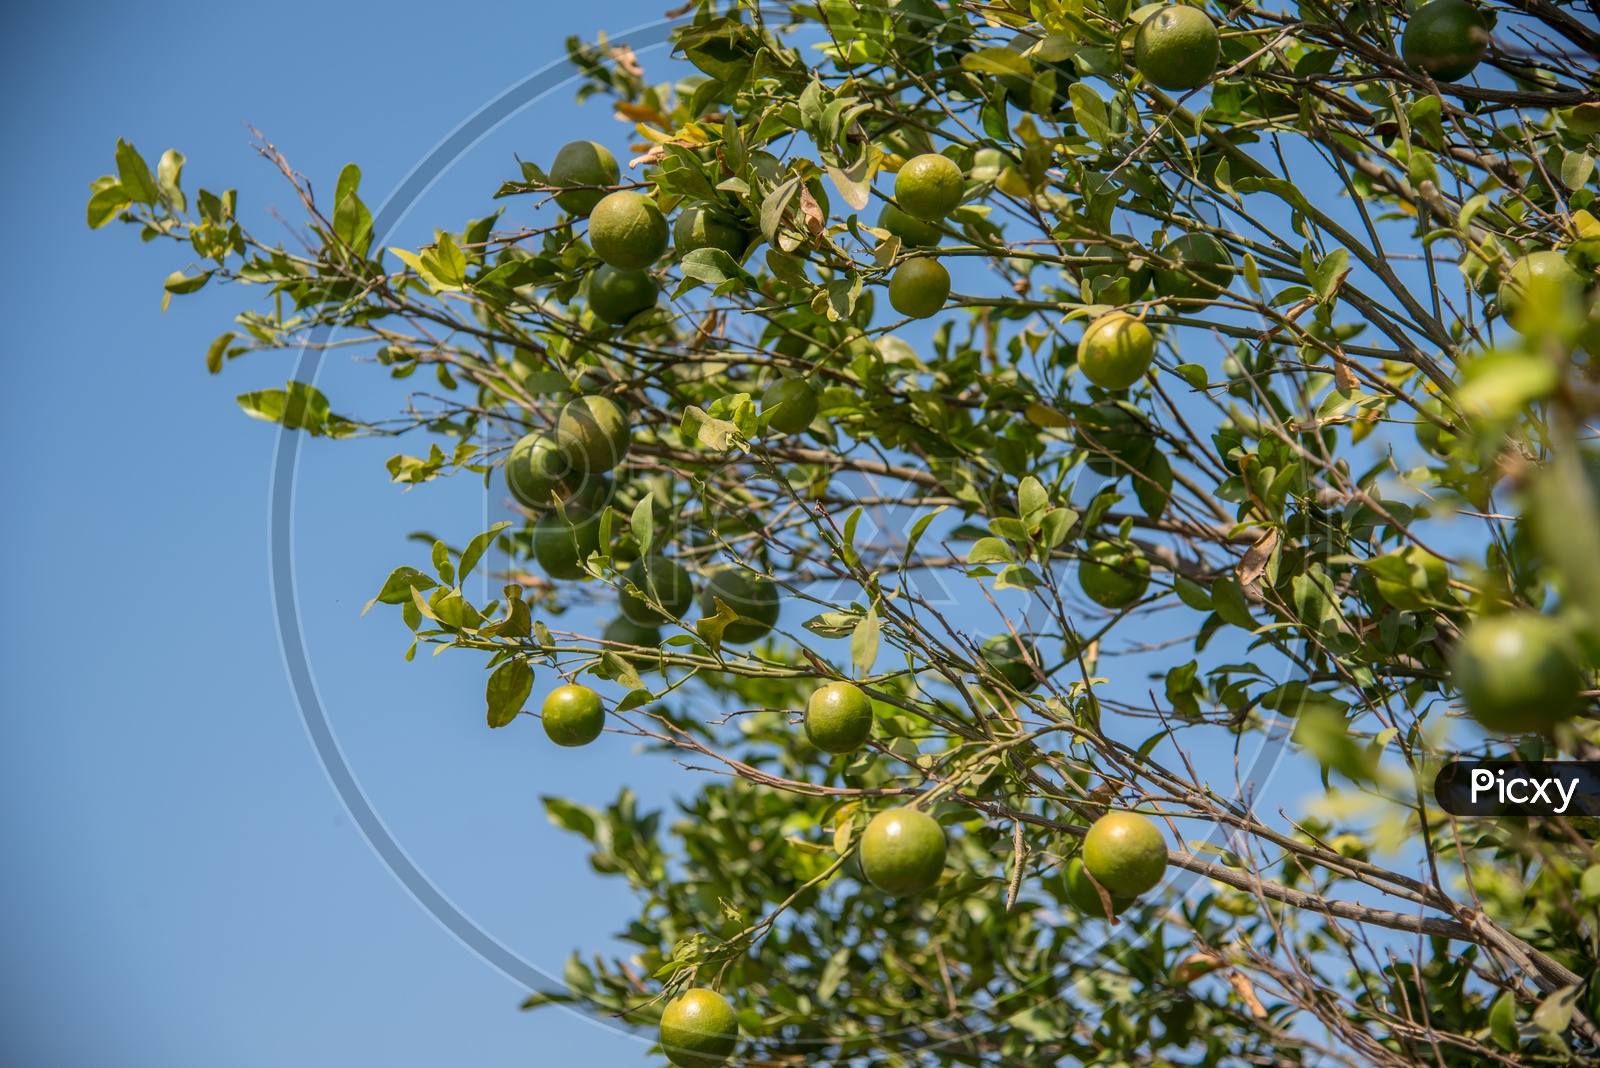 Fresh Sweet Oranges Growing on  Tree In an Farm or Agricultural Field